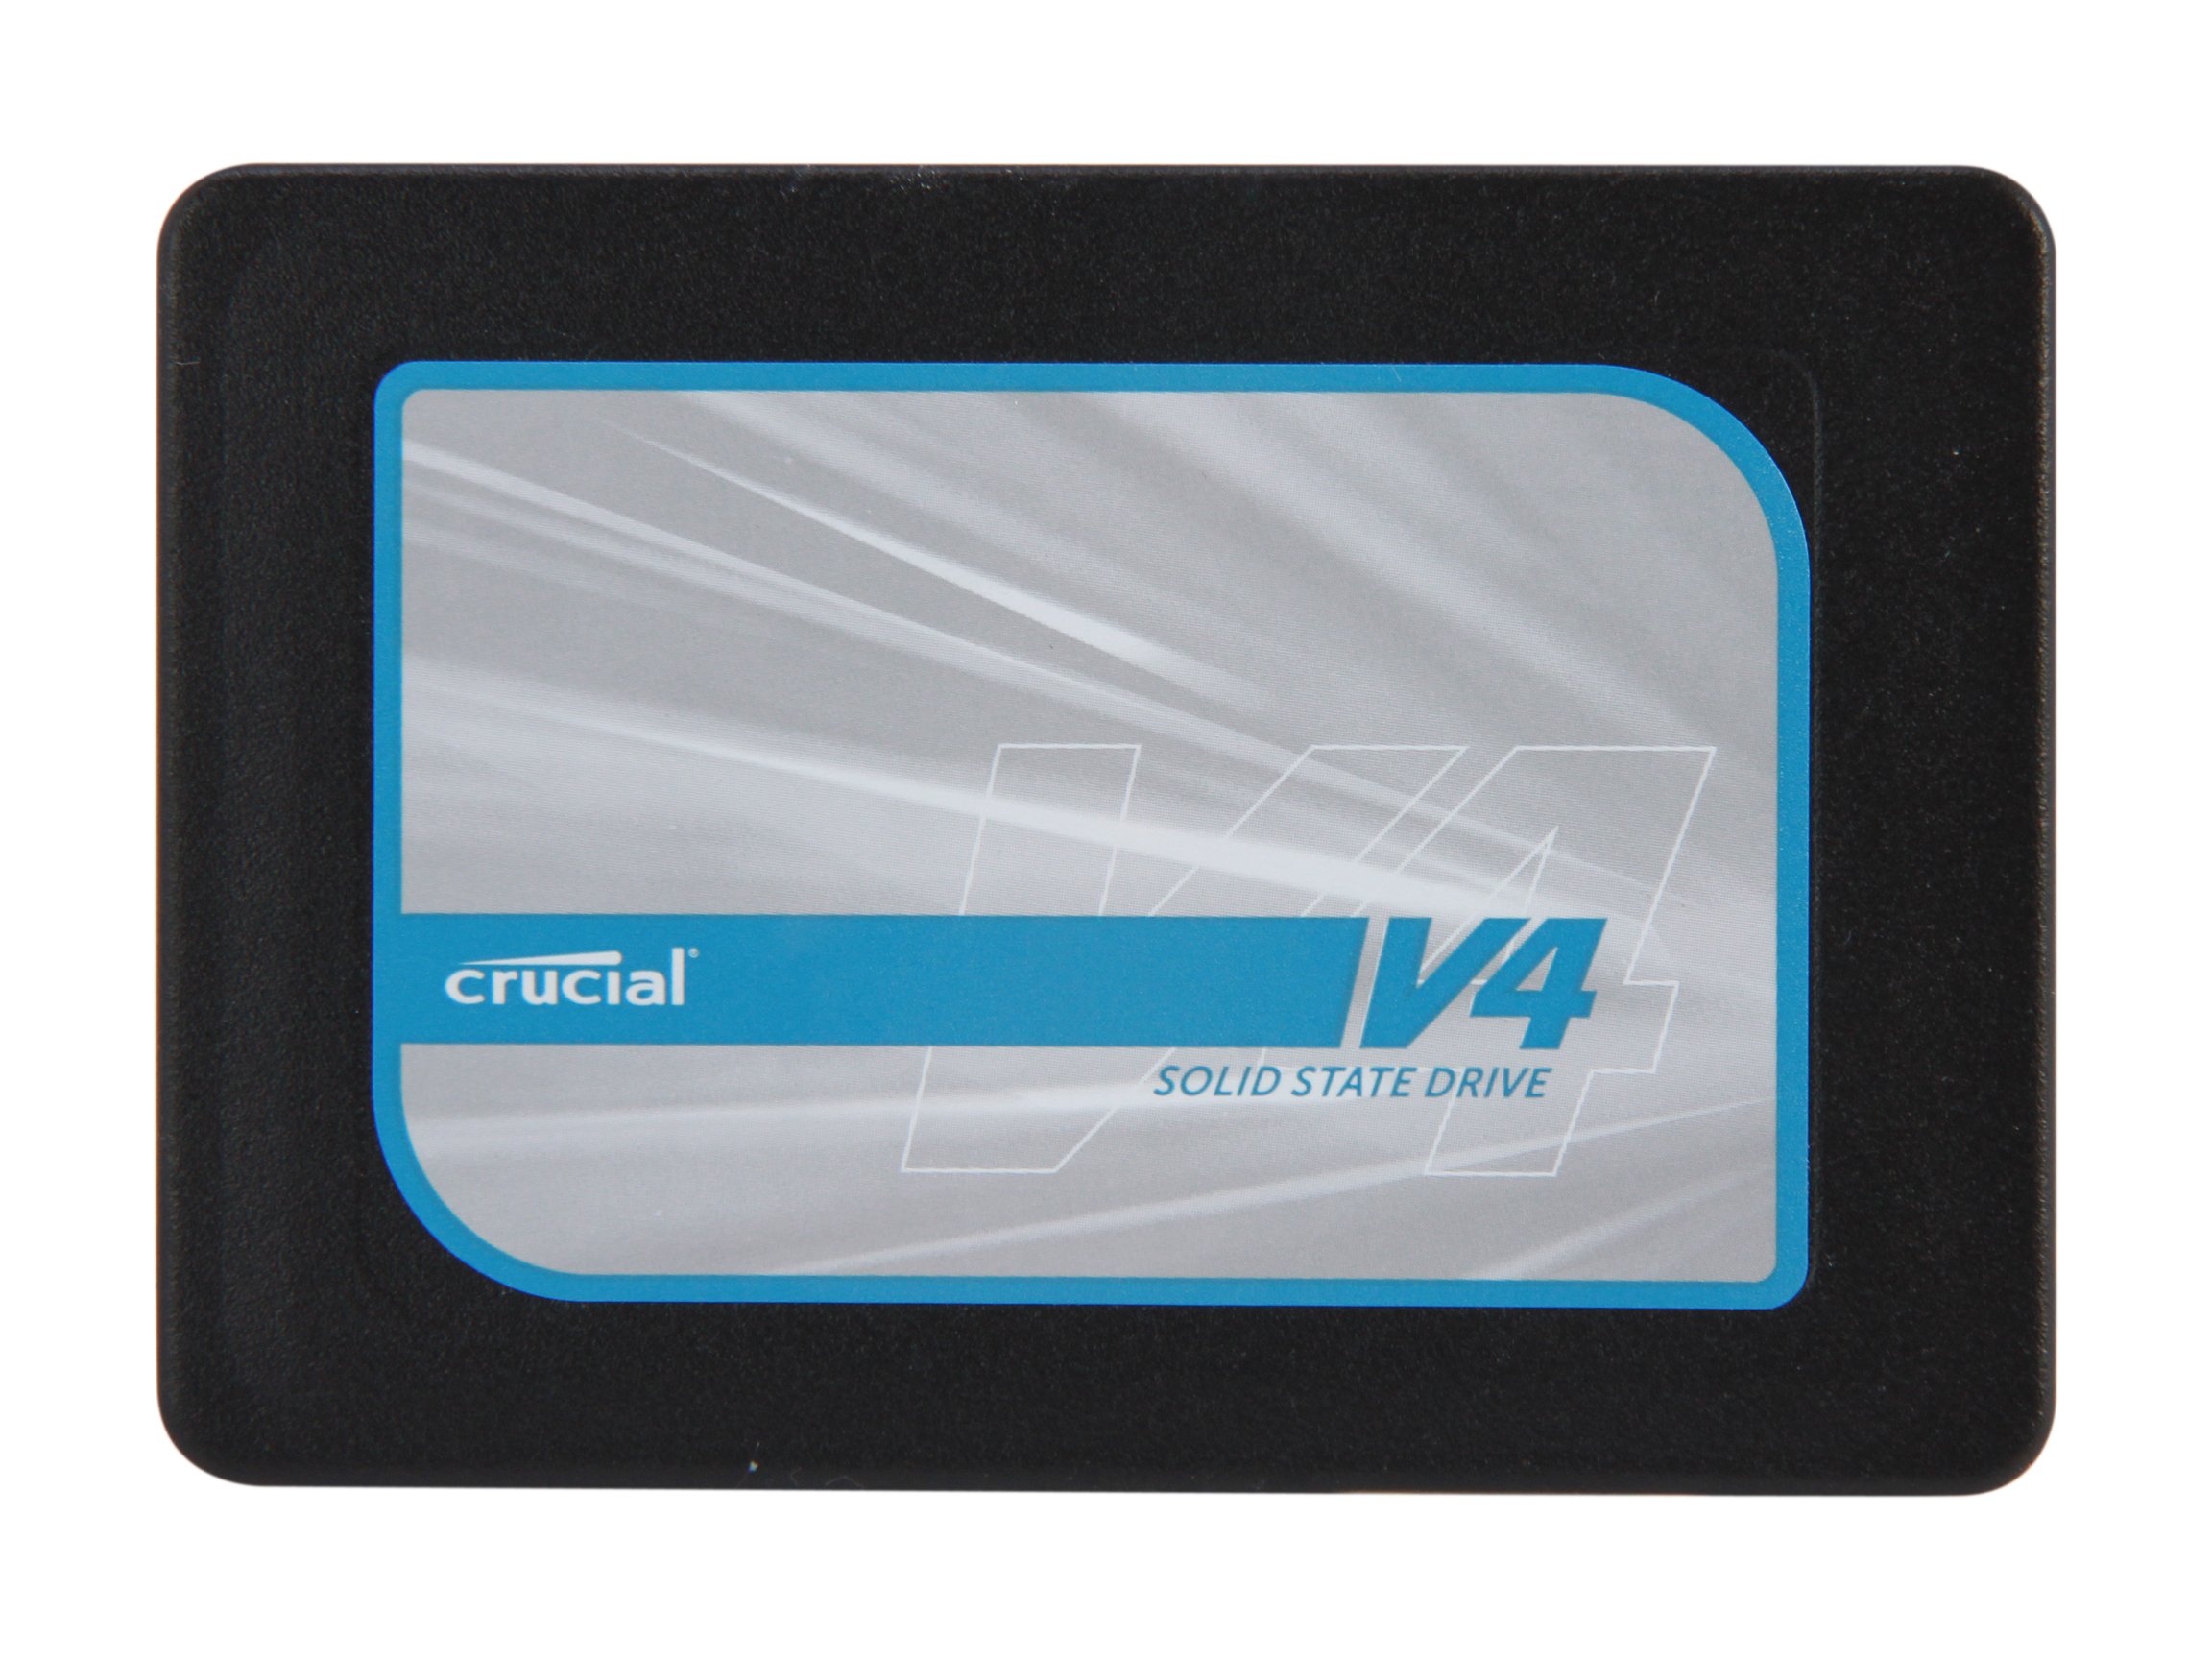 Crucial V4 CT128V4SSD2BAA 2.5" 128GB SATA II MLC Internal Solid State Drive (SSD) with Easy Desktop Install Kit